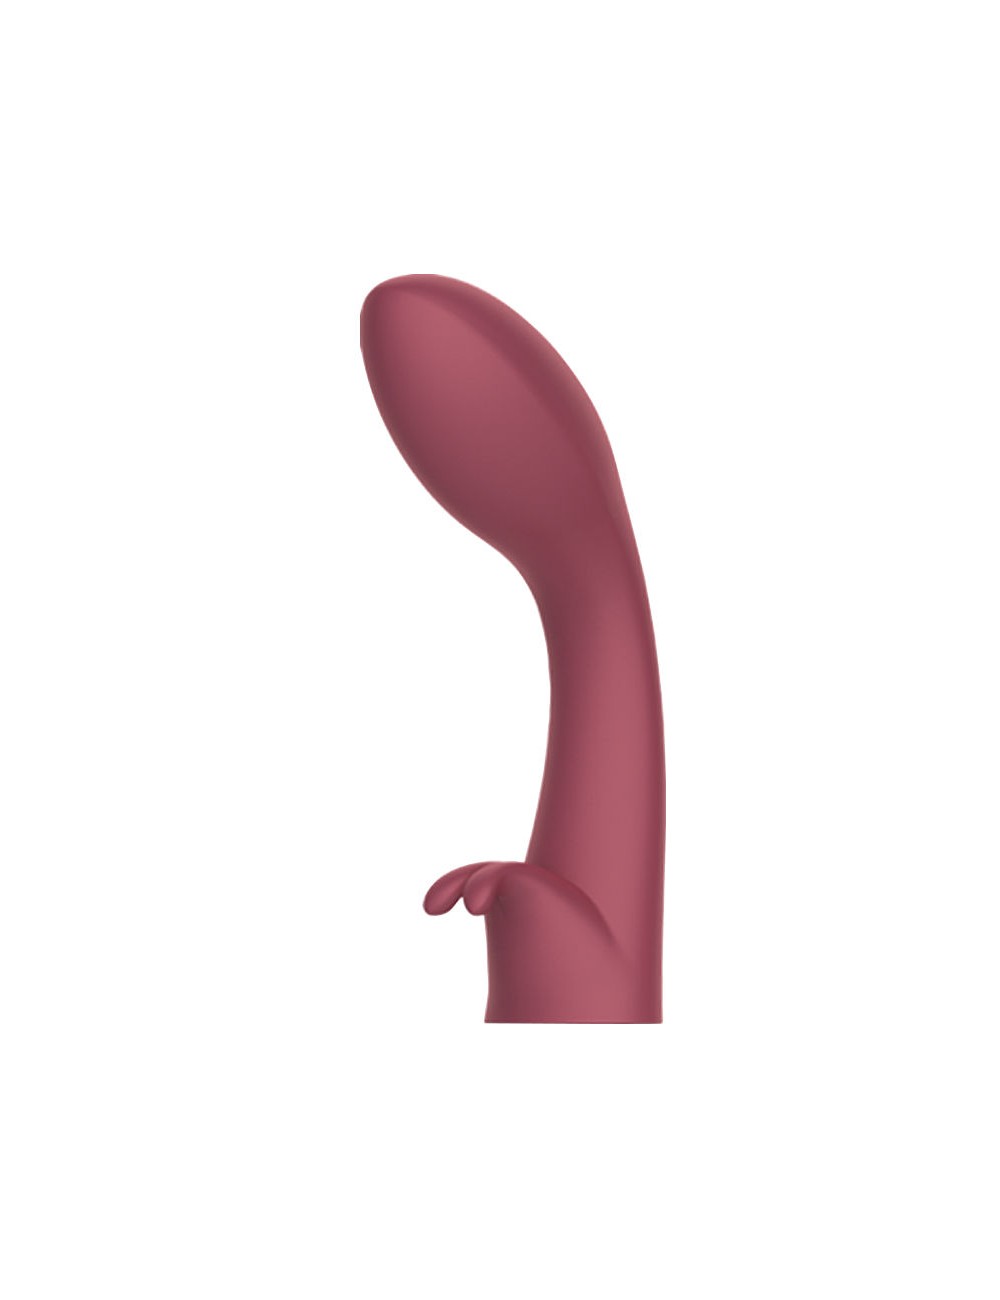 CICI BEAUTY VIBRATOR NUMBER 4 ( NOT CONTROLLER INCLUIDED)